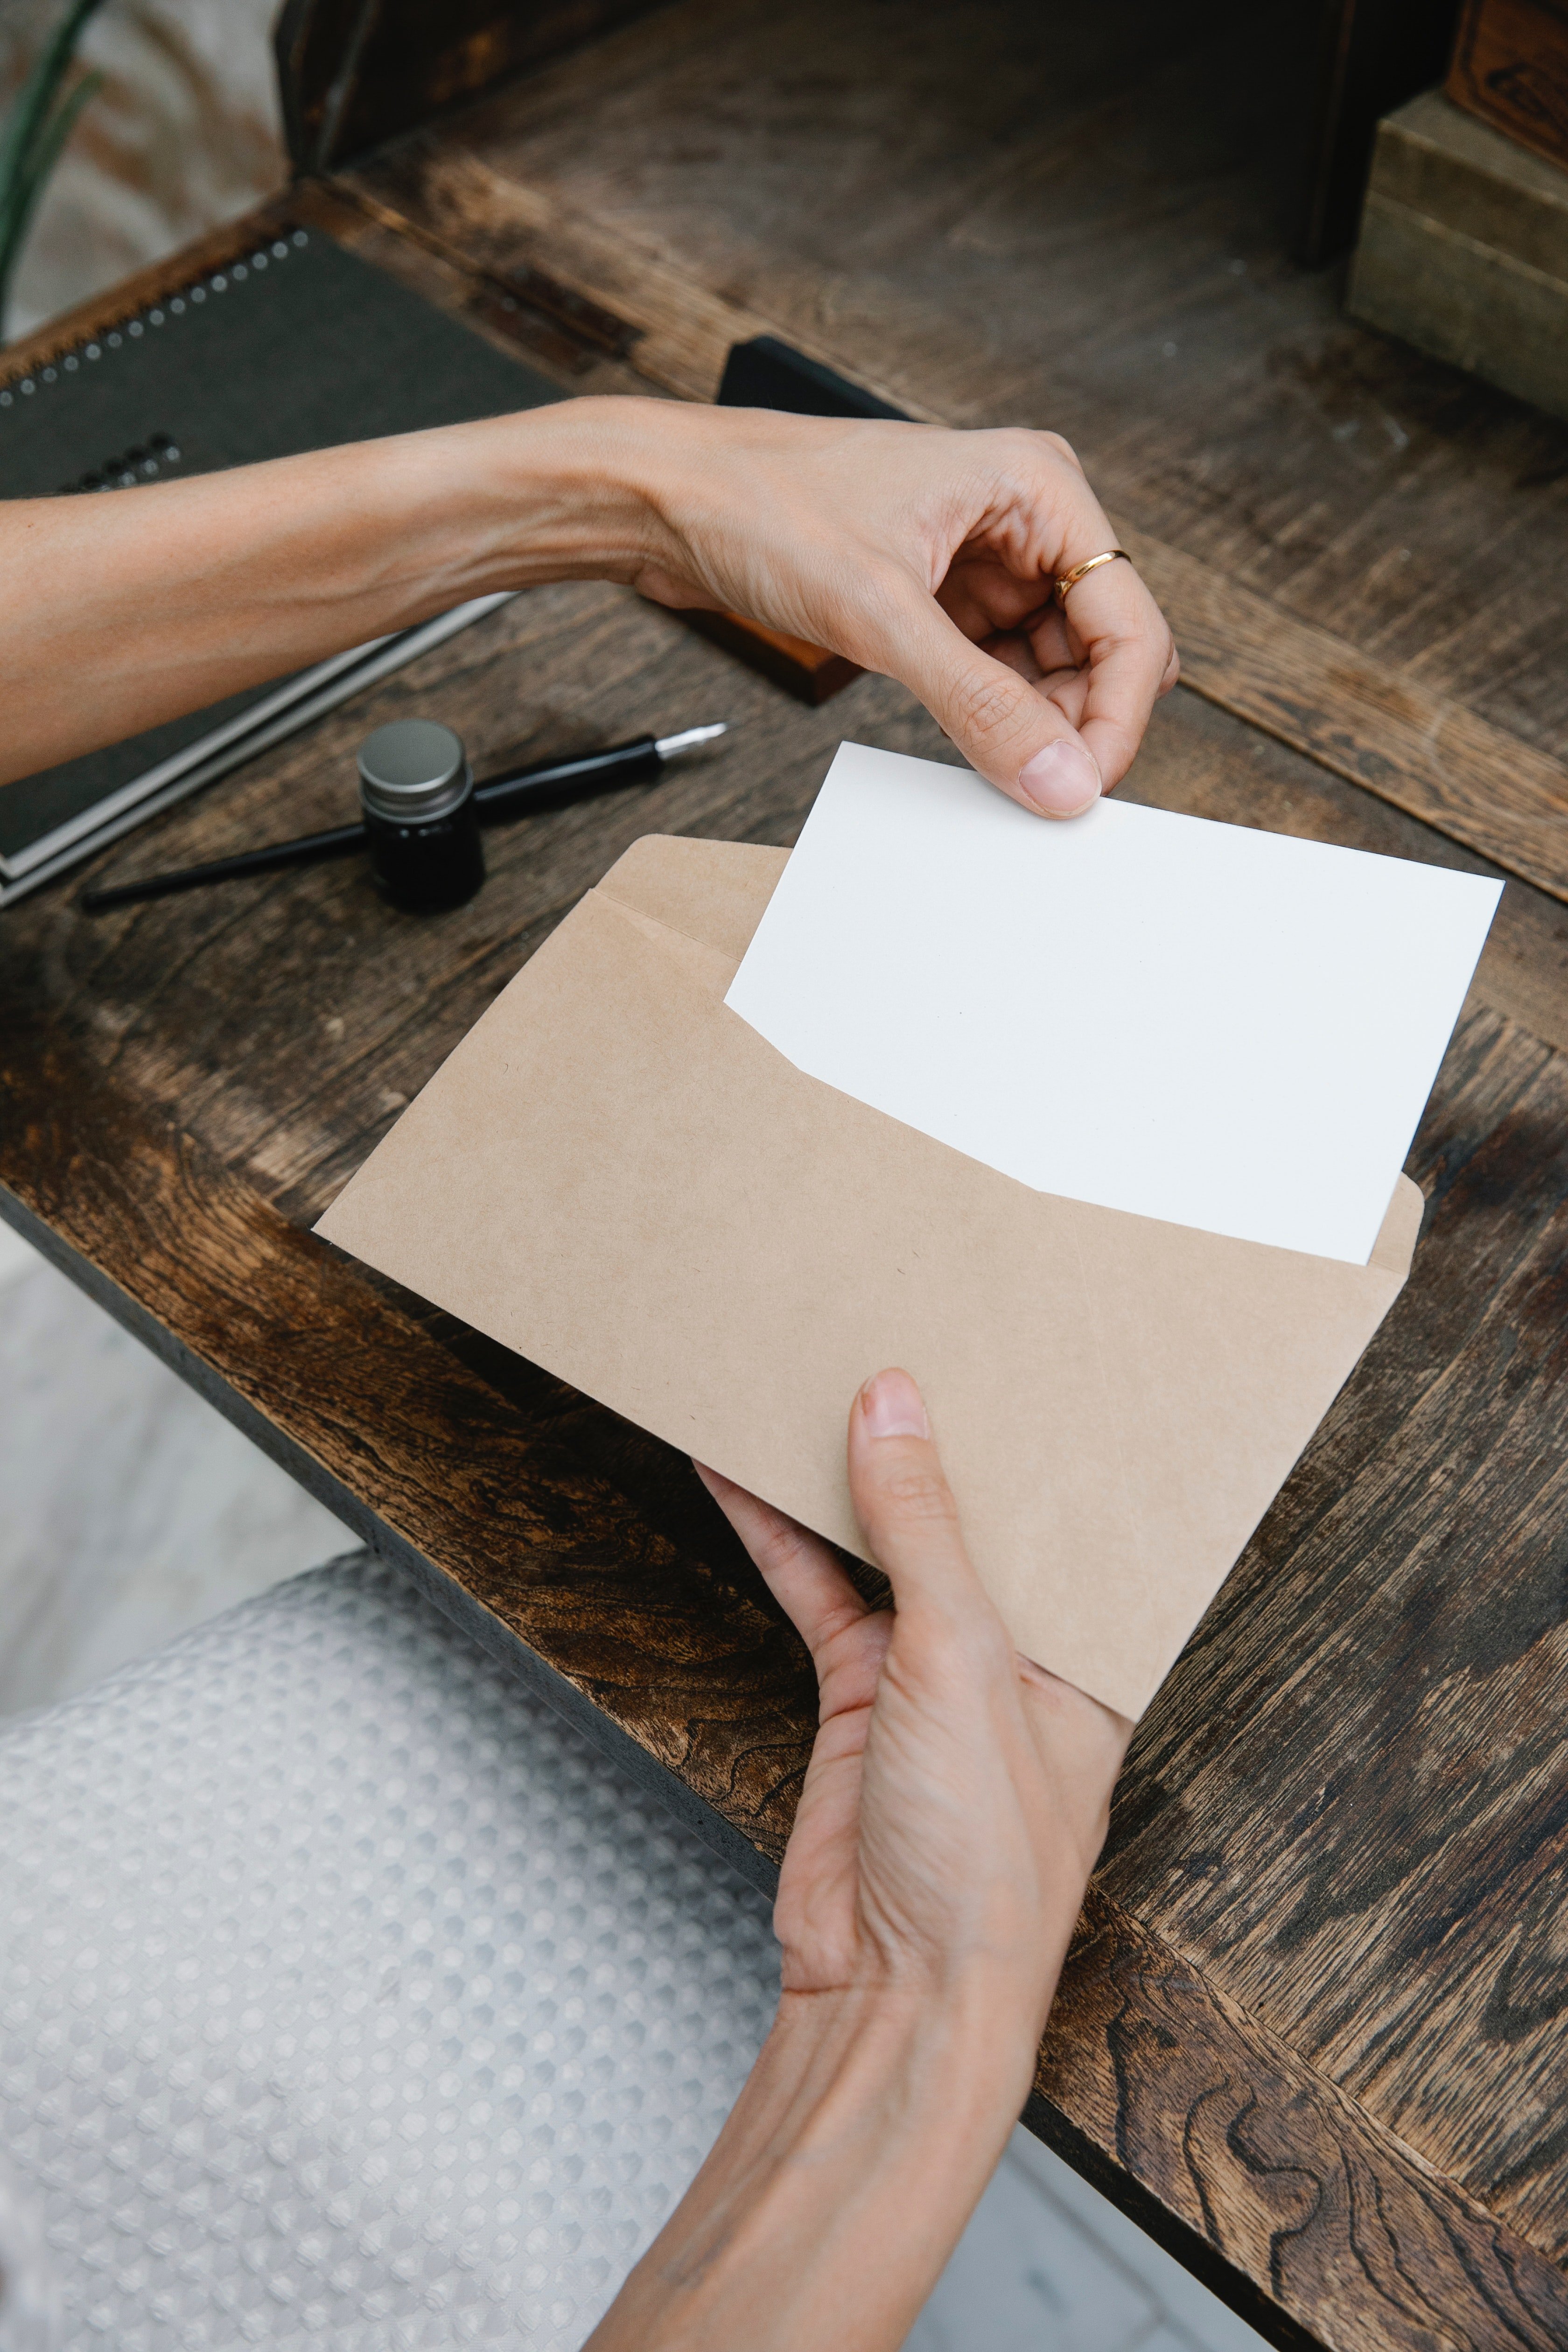 The receptionist stopped them to hand them a letter. | Source: Pexels